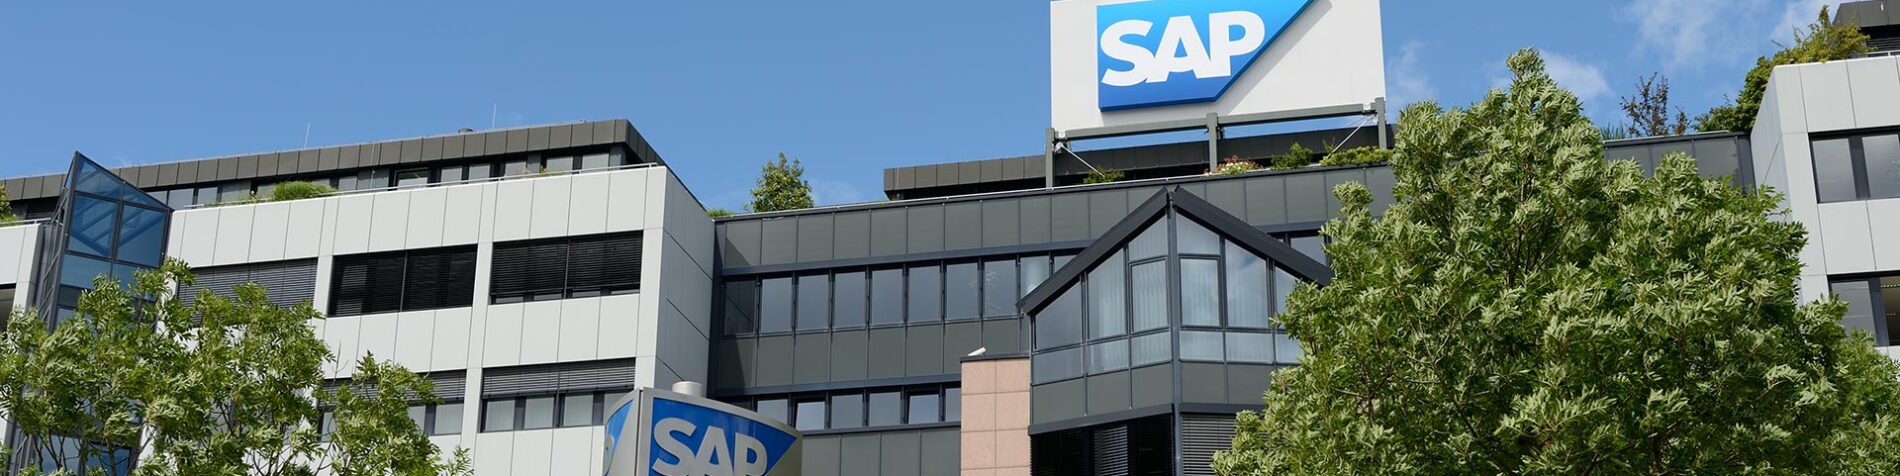 SAP to Acquire Gigya, Market Leader in Customer Identity and Access Management